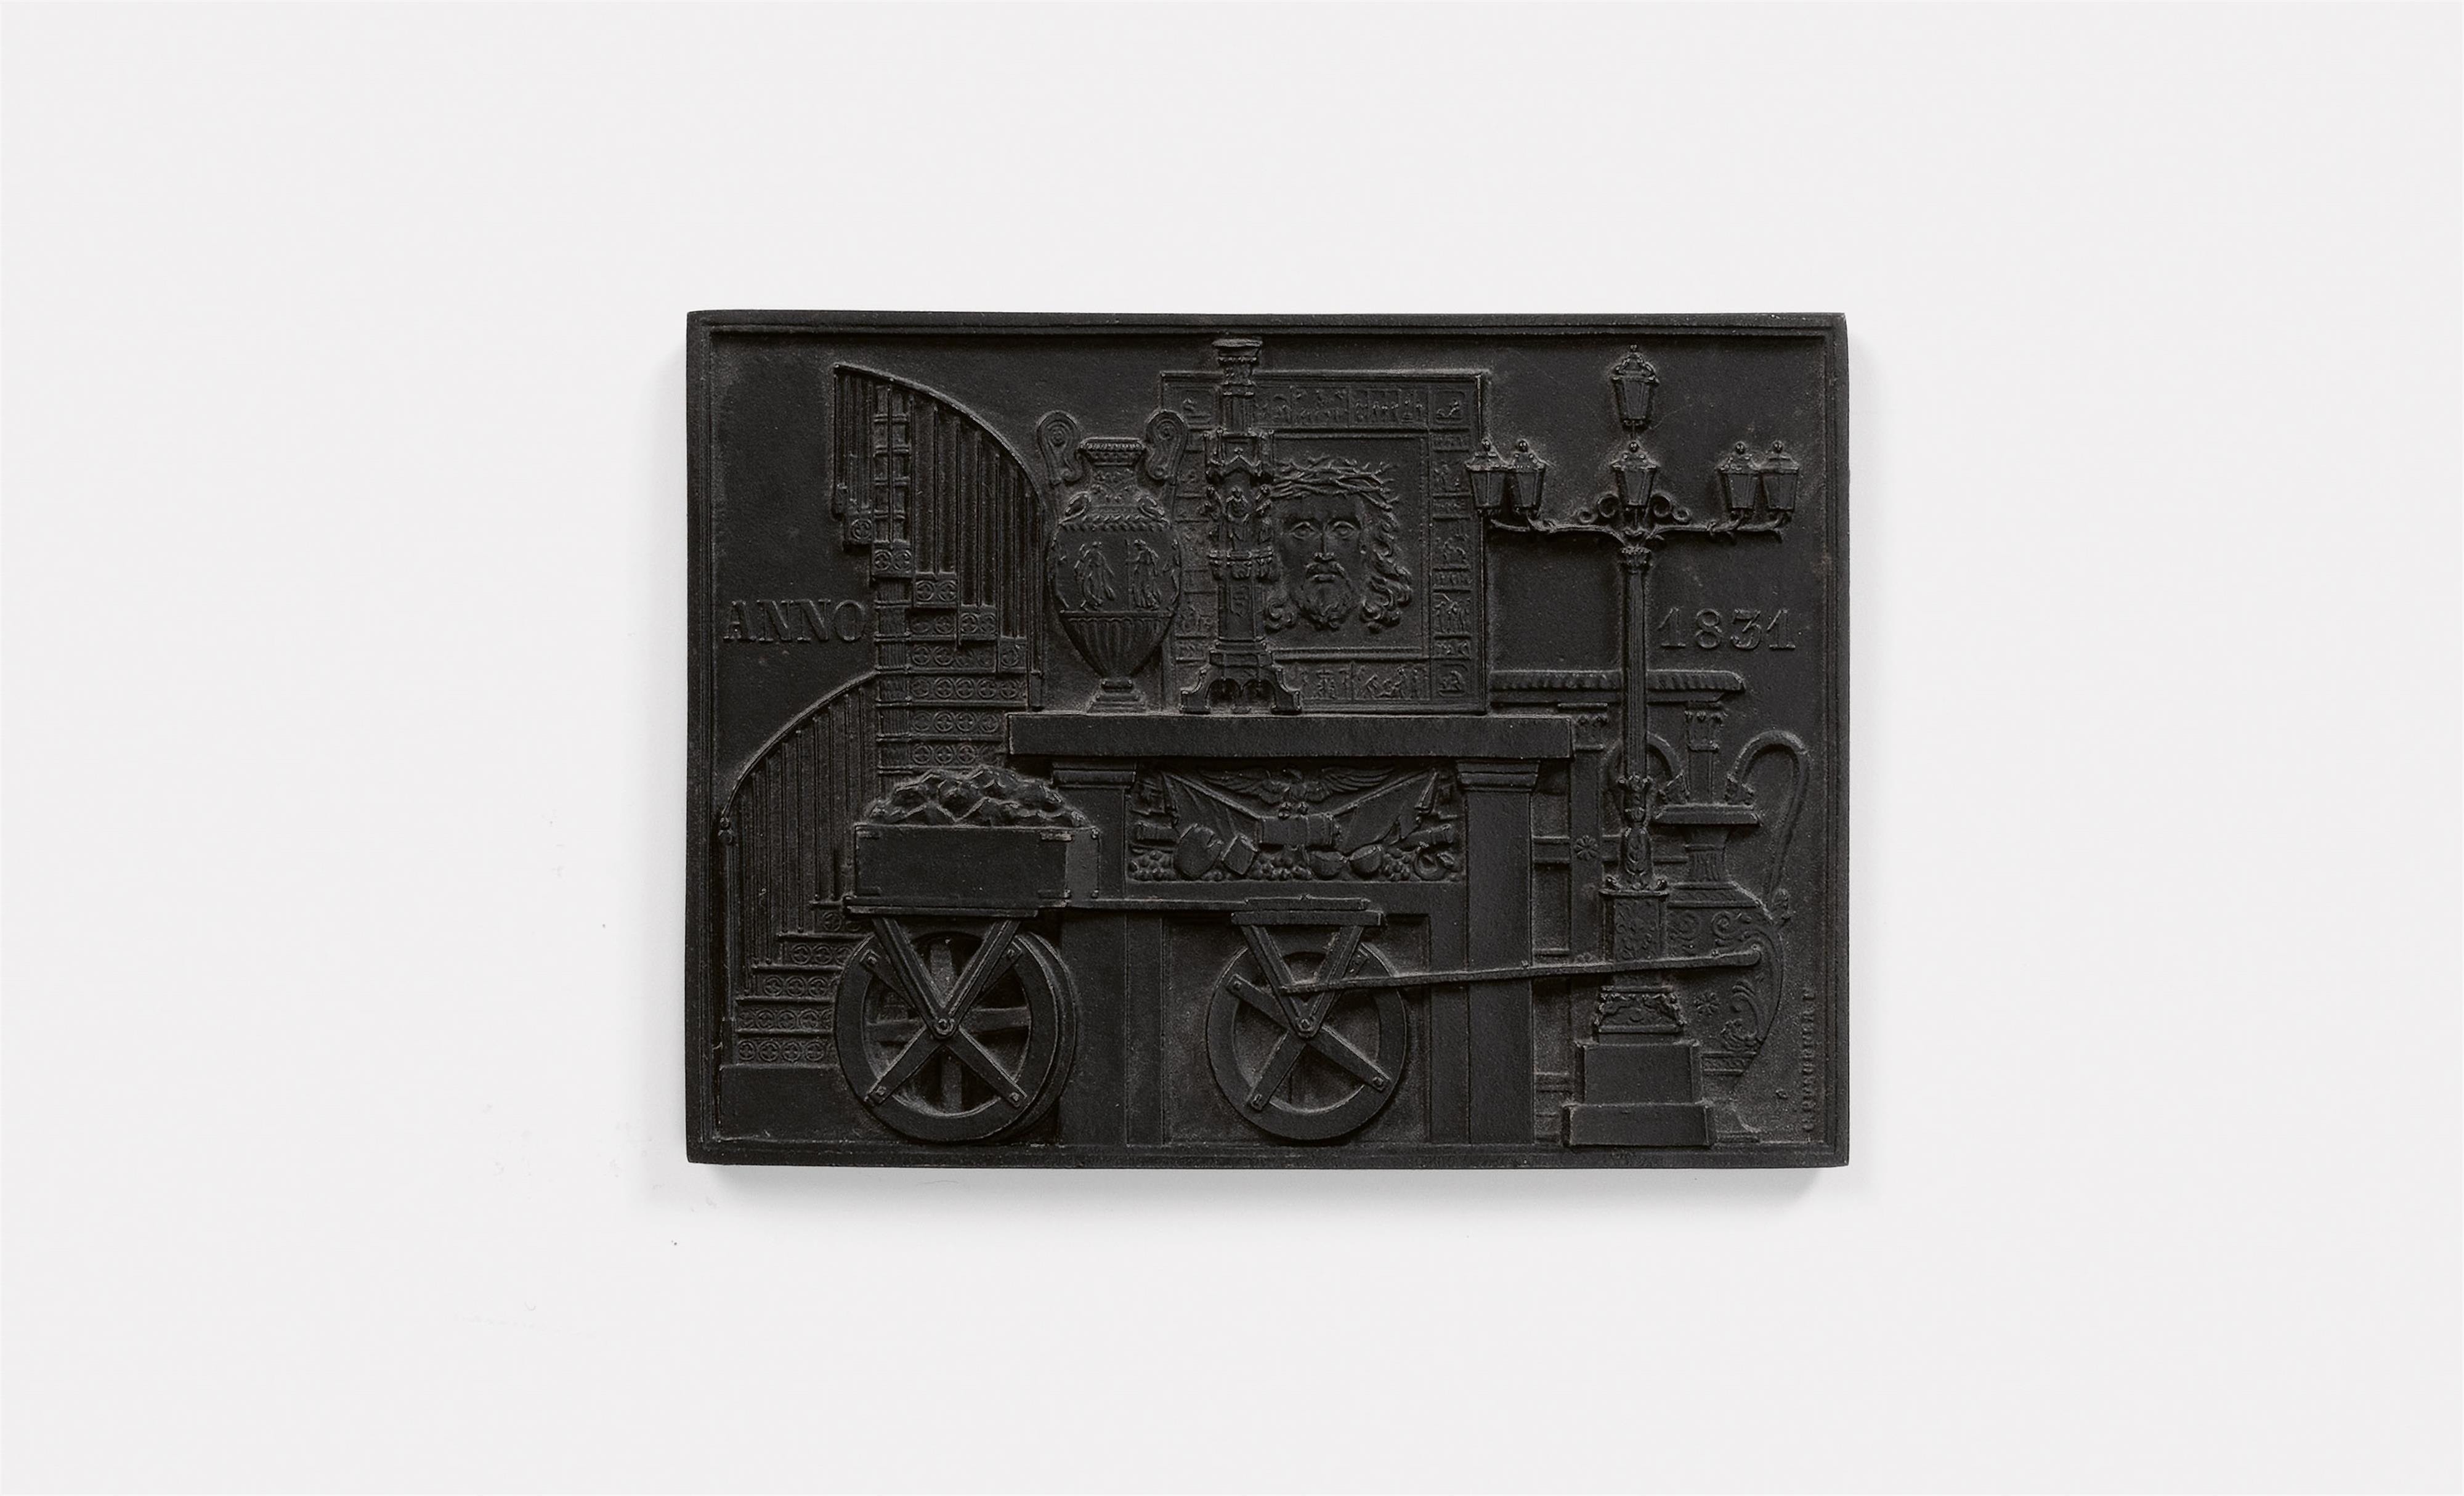 A cast iron New Year's plaque inscribed "ANNO 1831" - image-1